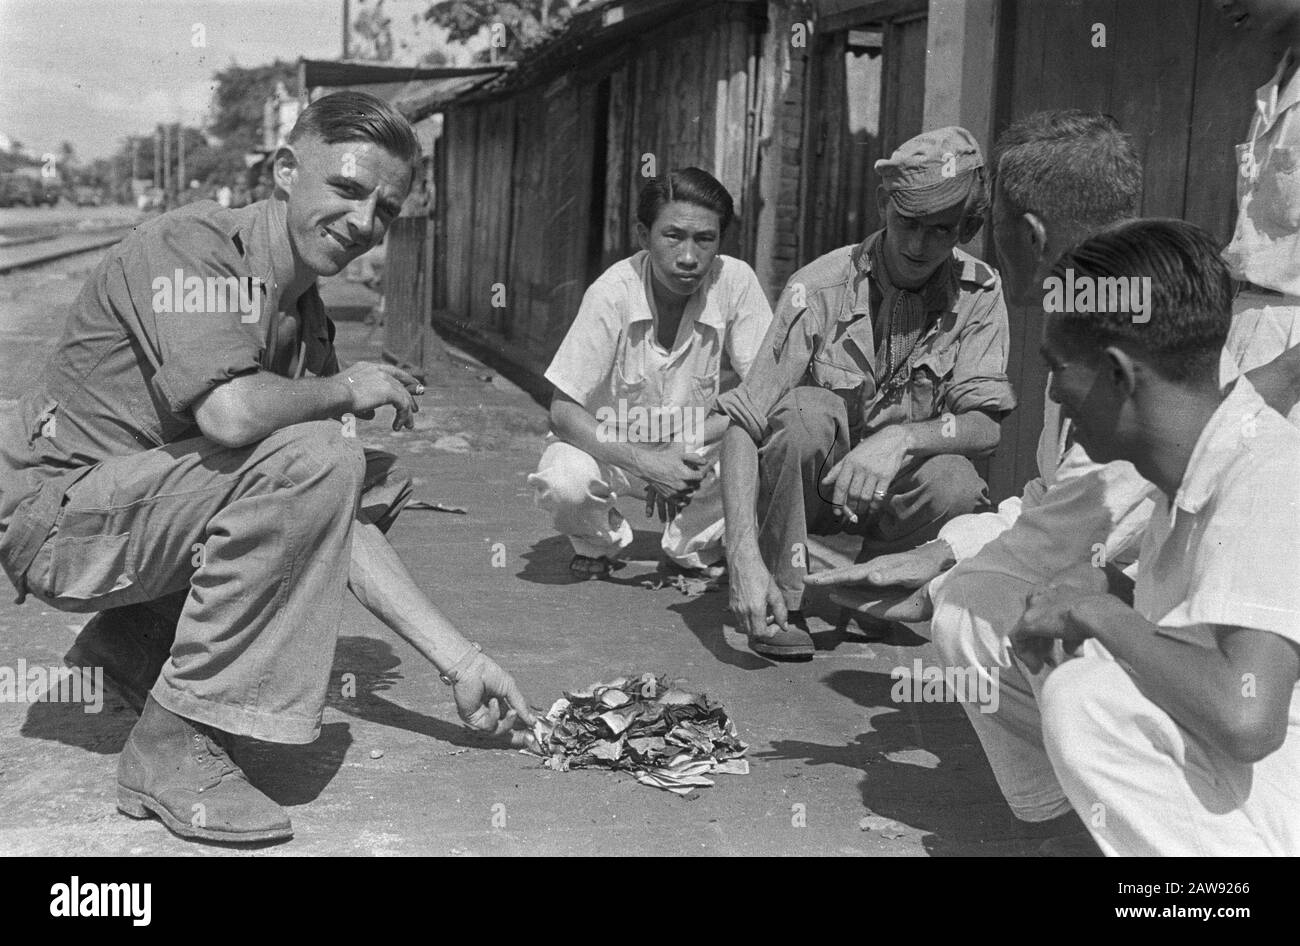 Rise of the V-brigade  Dutch soldier shows a pile of burnt documents Date: 12/01/1948 Location: Indonesia Dutch East Indies Stock Photo